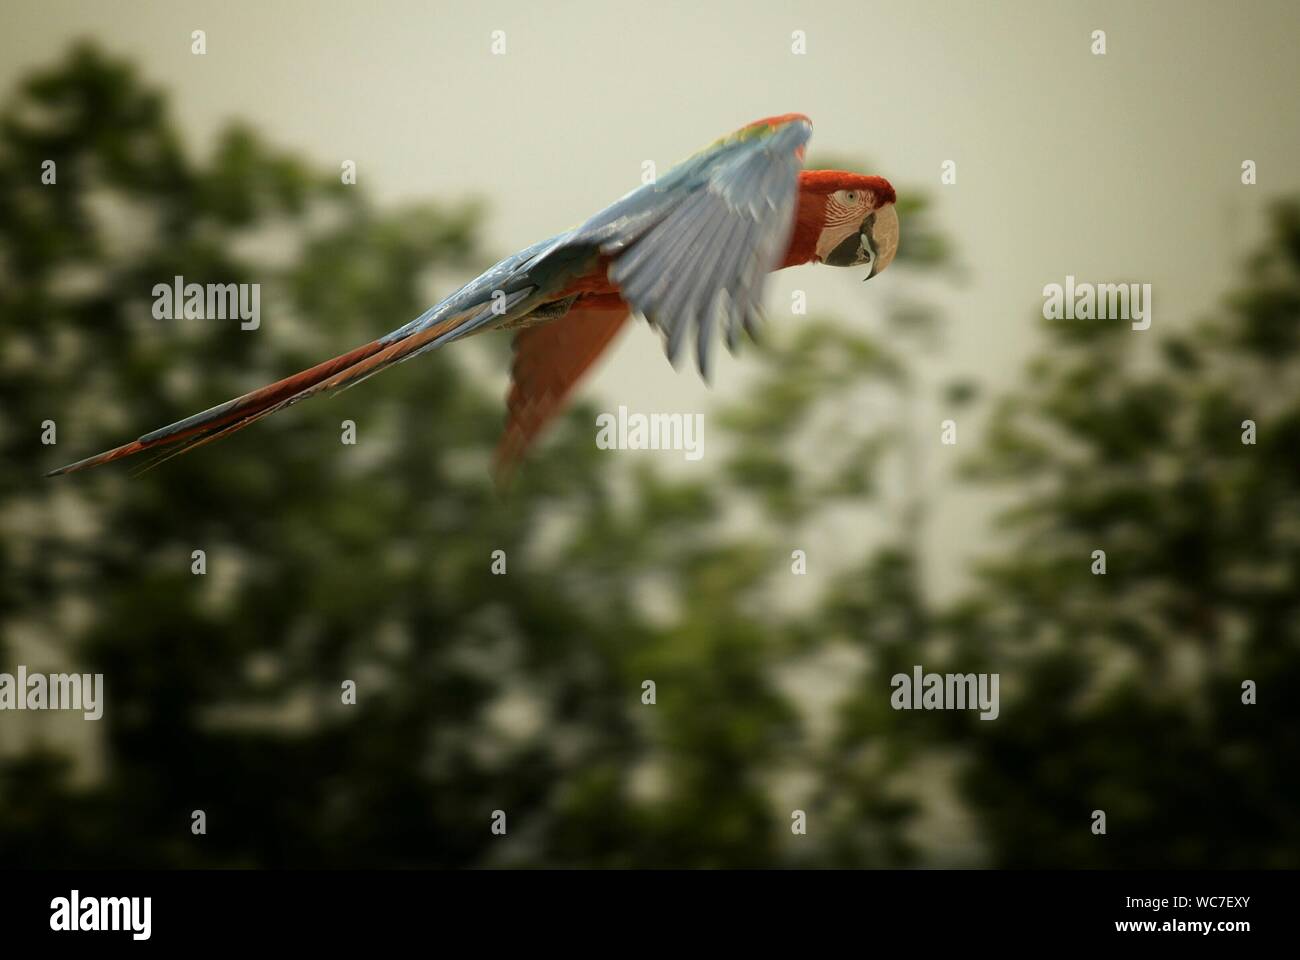 Scarlet Macaw Flying Against Trees Stock Photo